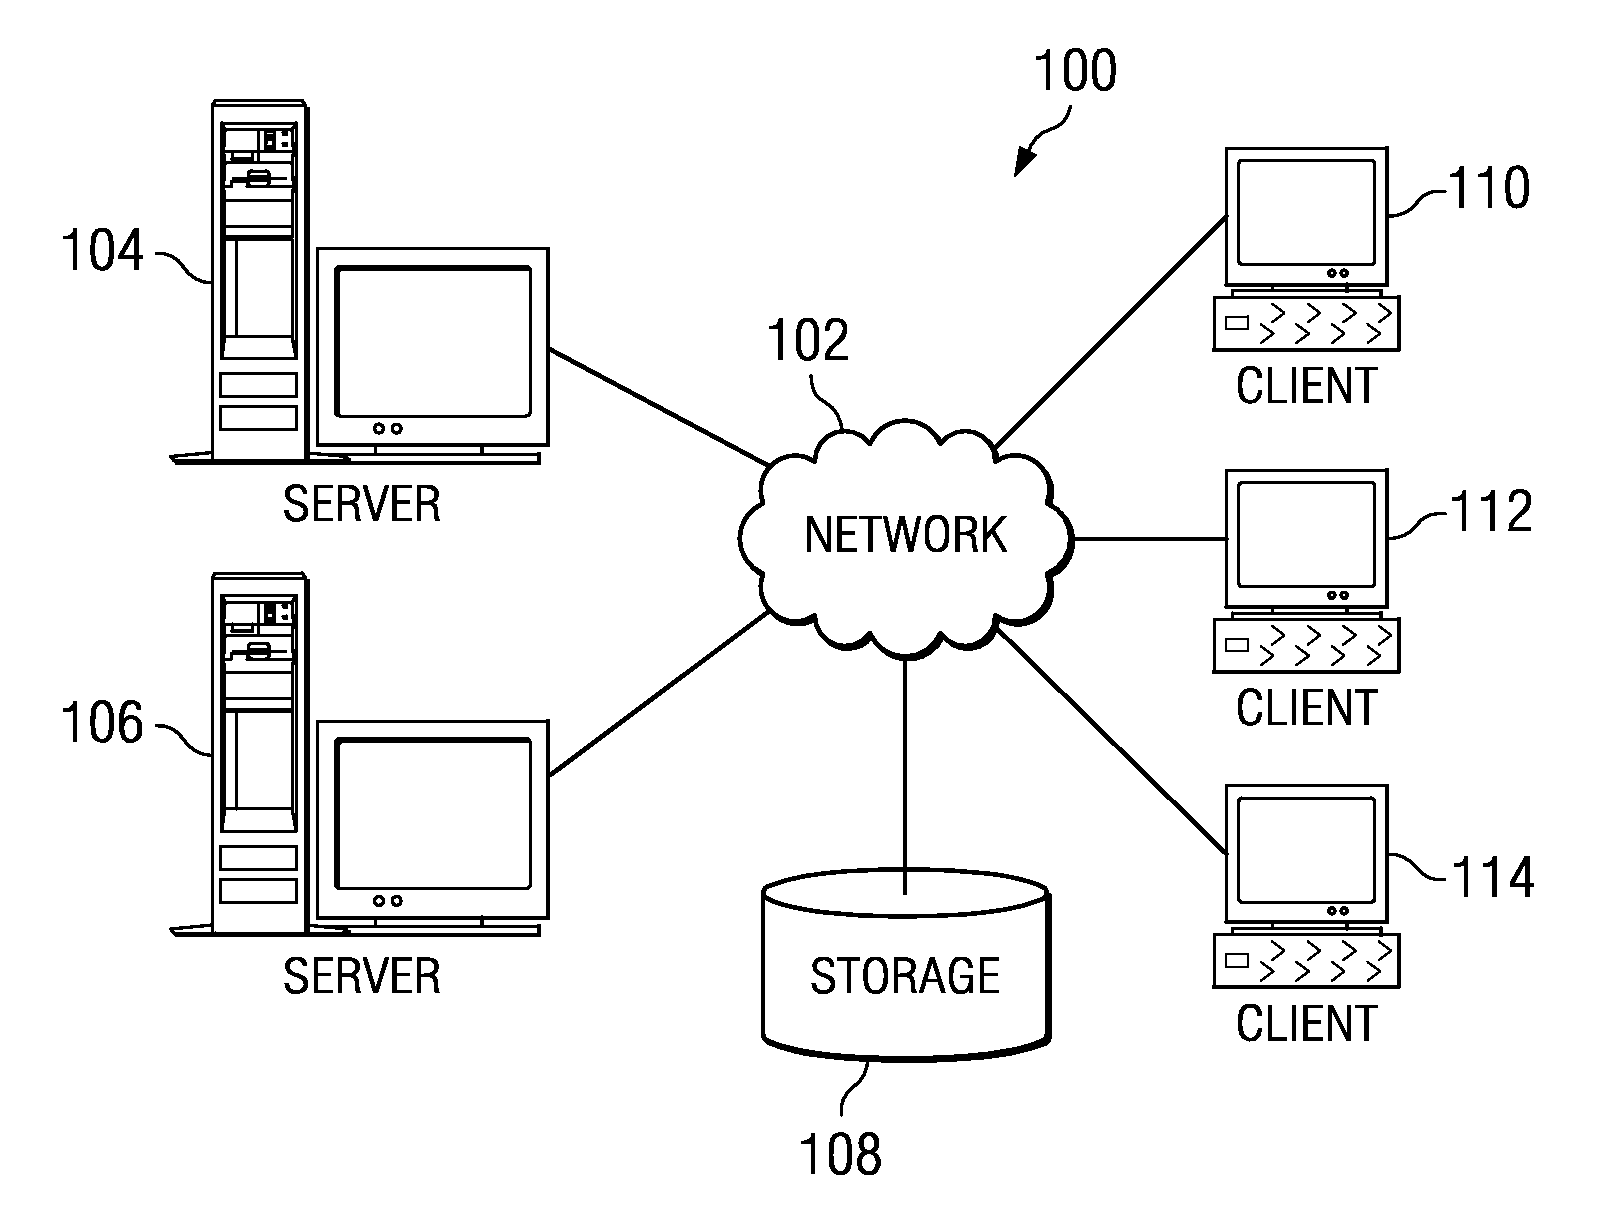 Method for maintaining state consistency among multiple state-driven file system entities when entities become disconnected